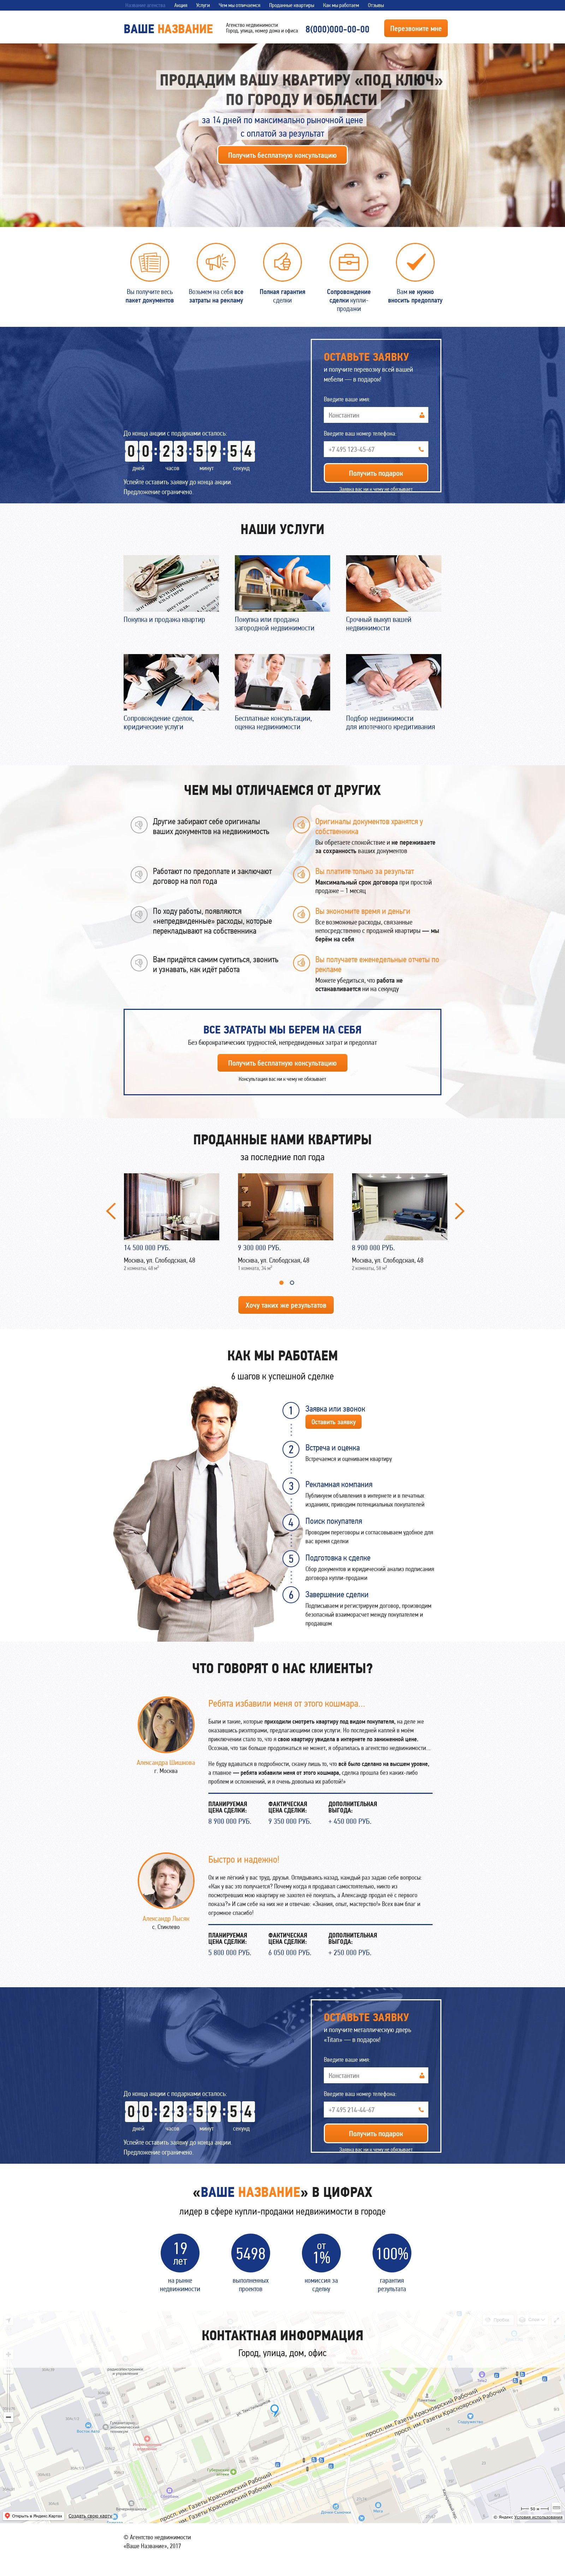 Landing page - Real estate agency. Turnkey apartments for sale